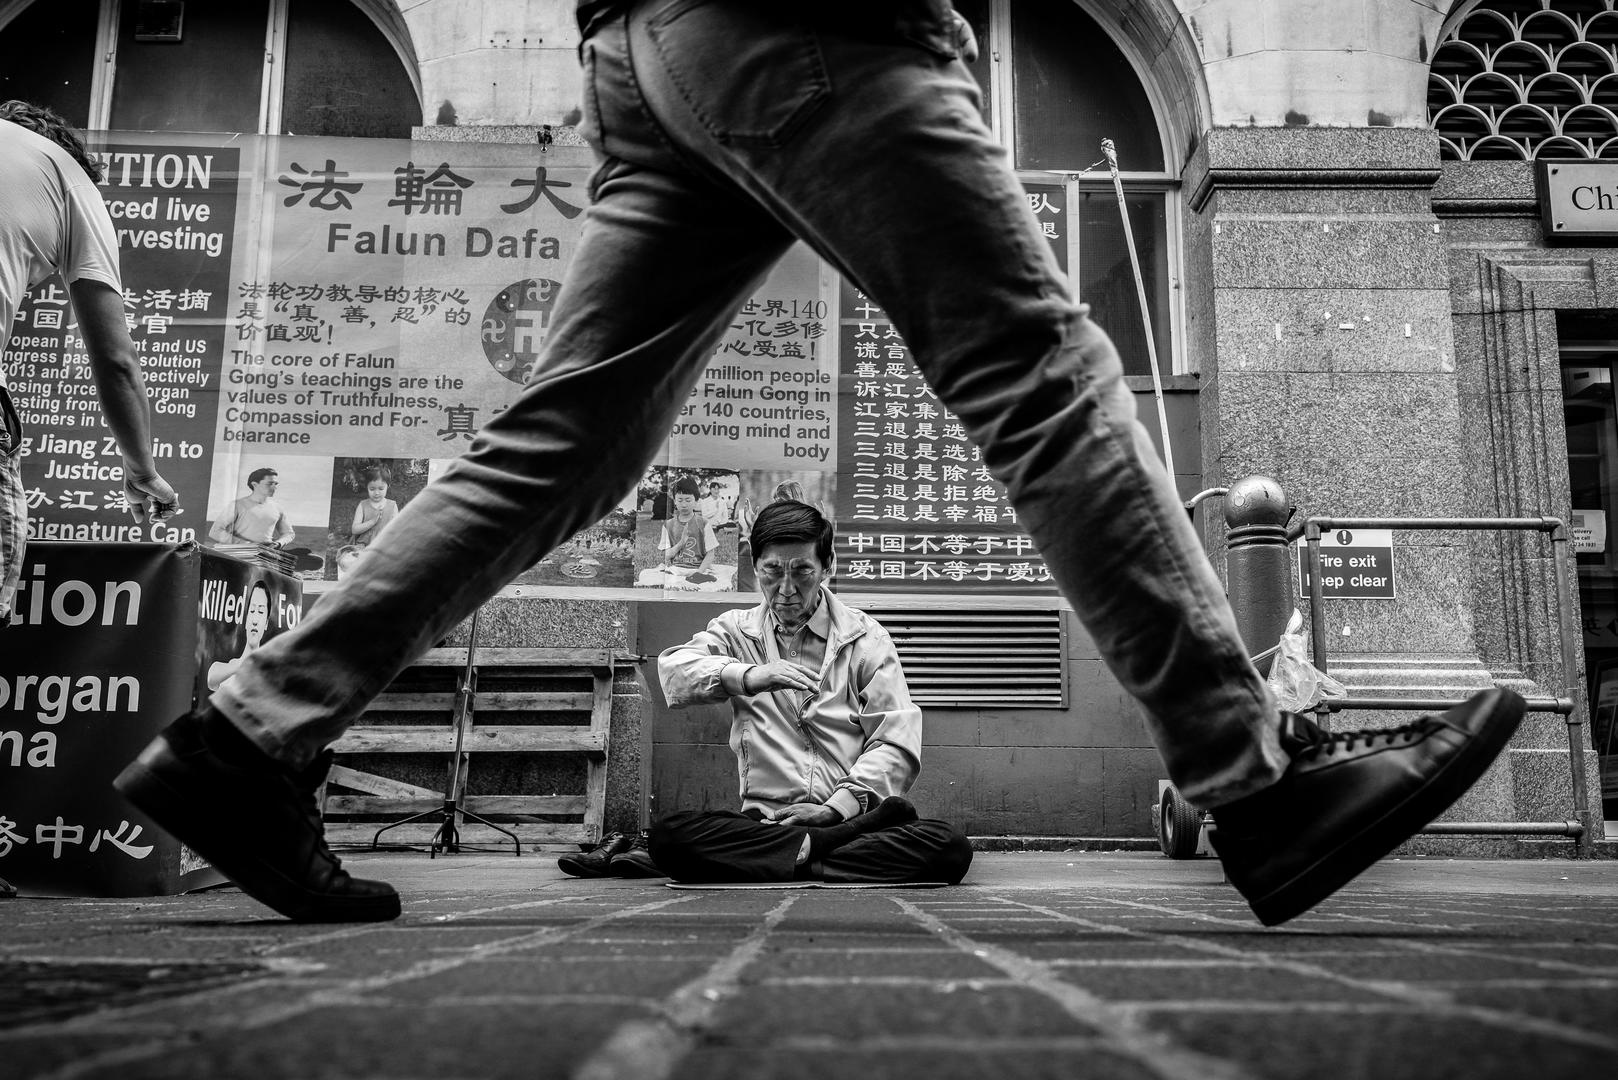 Expert choices Street photography Street photo contest Photocrowd